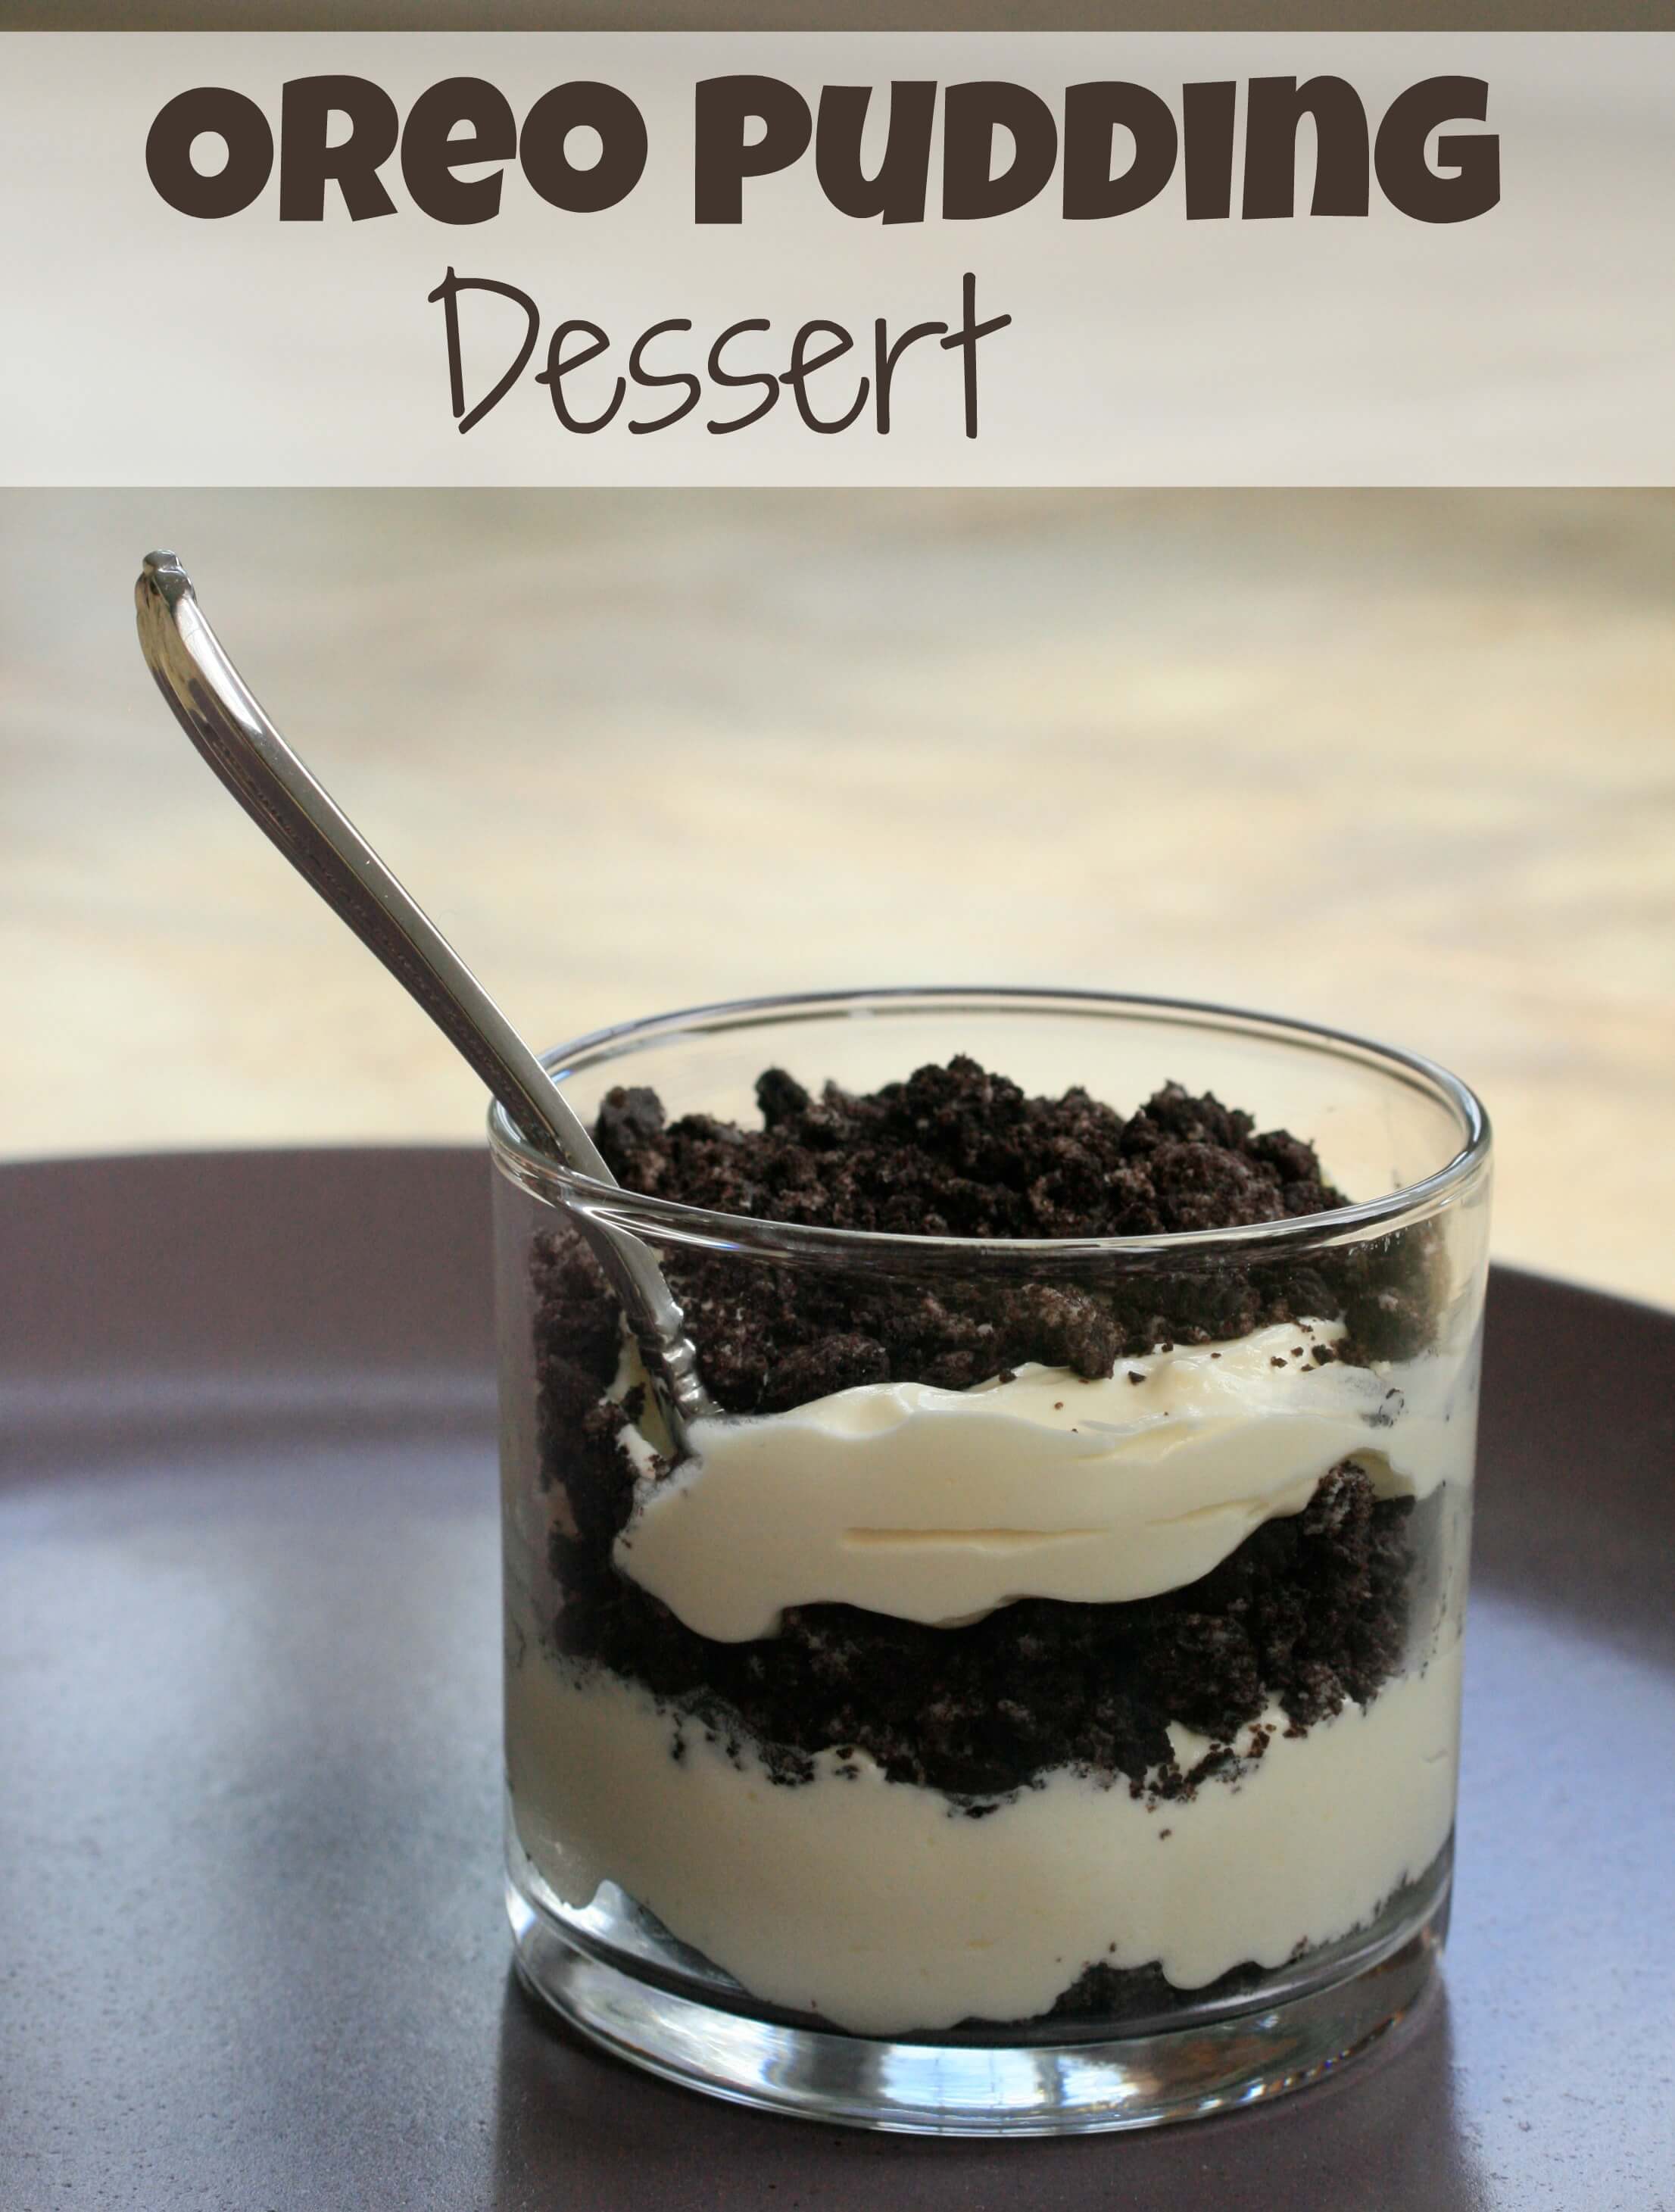 Easy Oreo Pudding Layer Dessert : lew party of 2: The Delicious Oreo ...